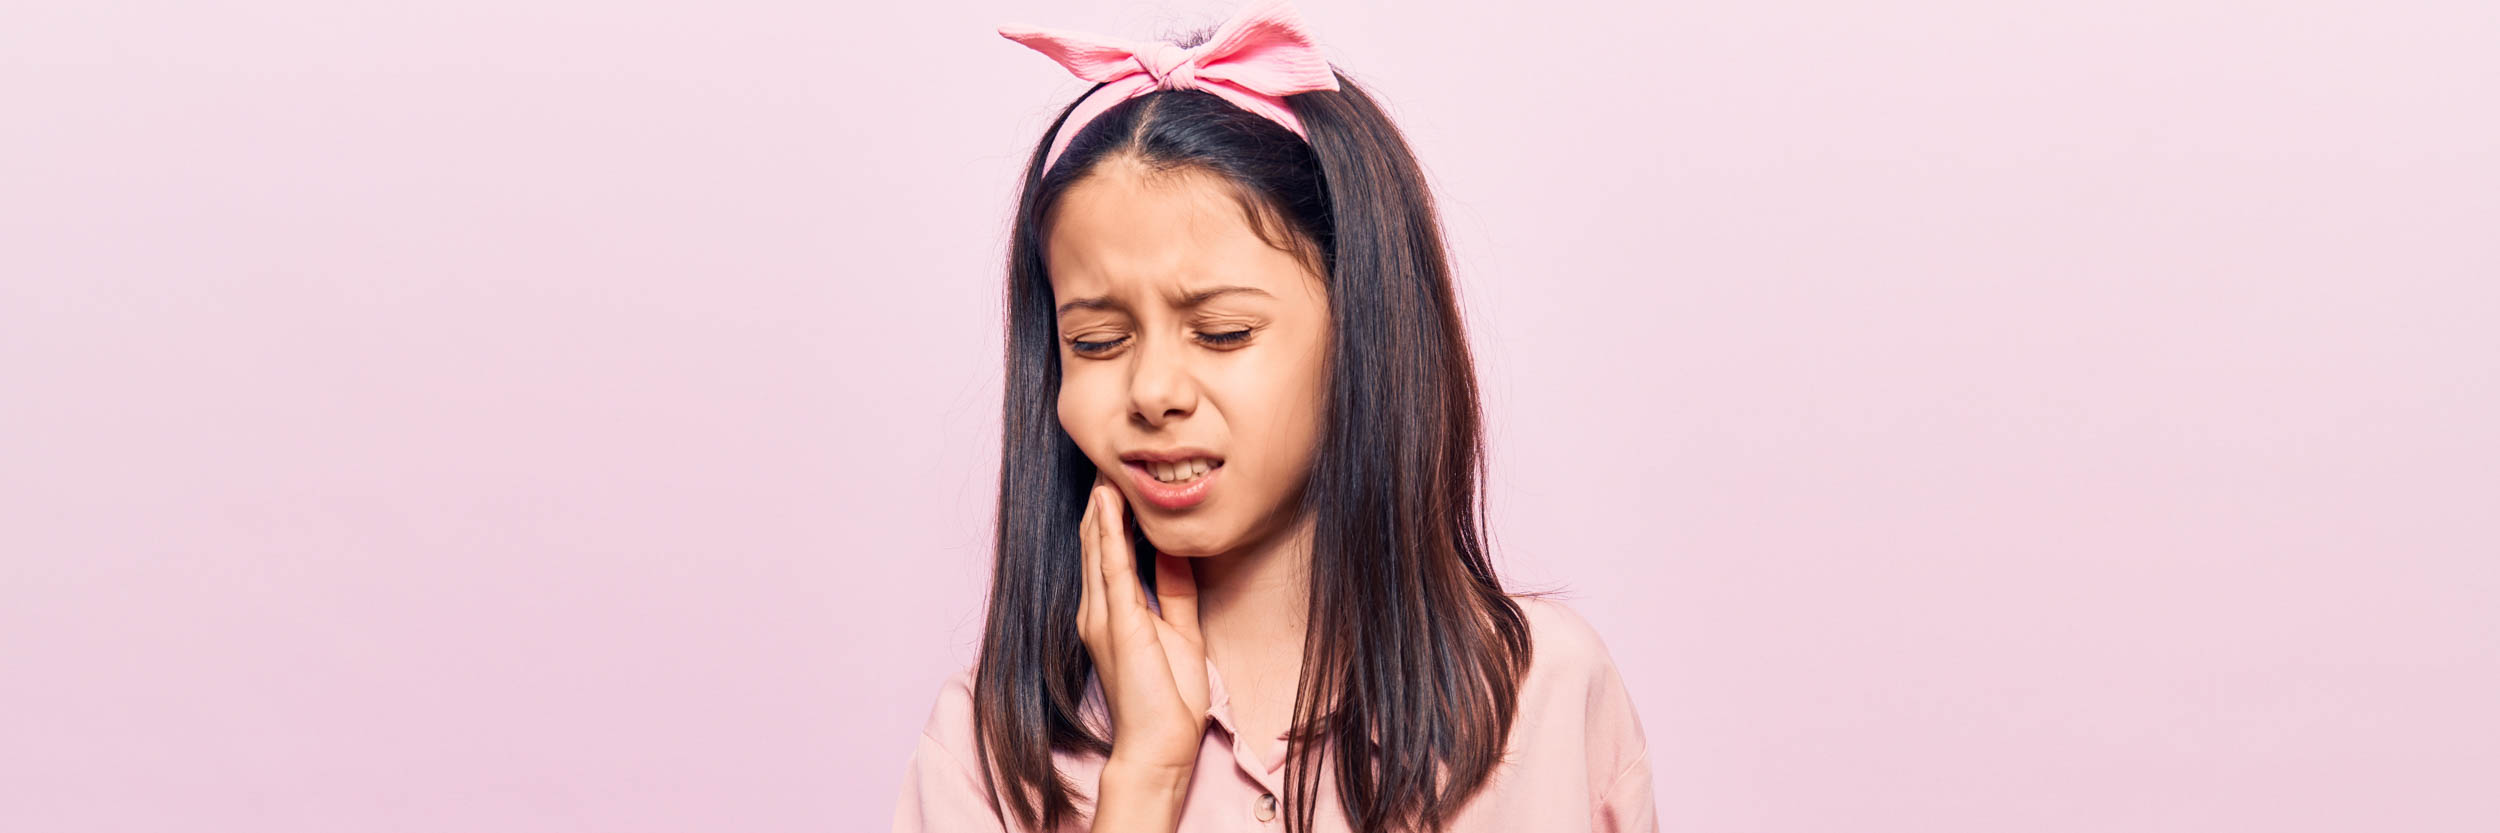 A young girl with mouth pain